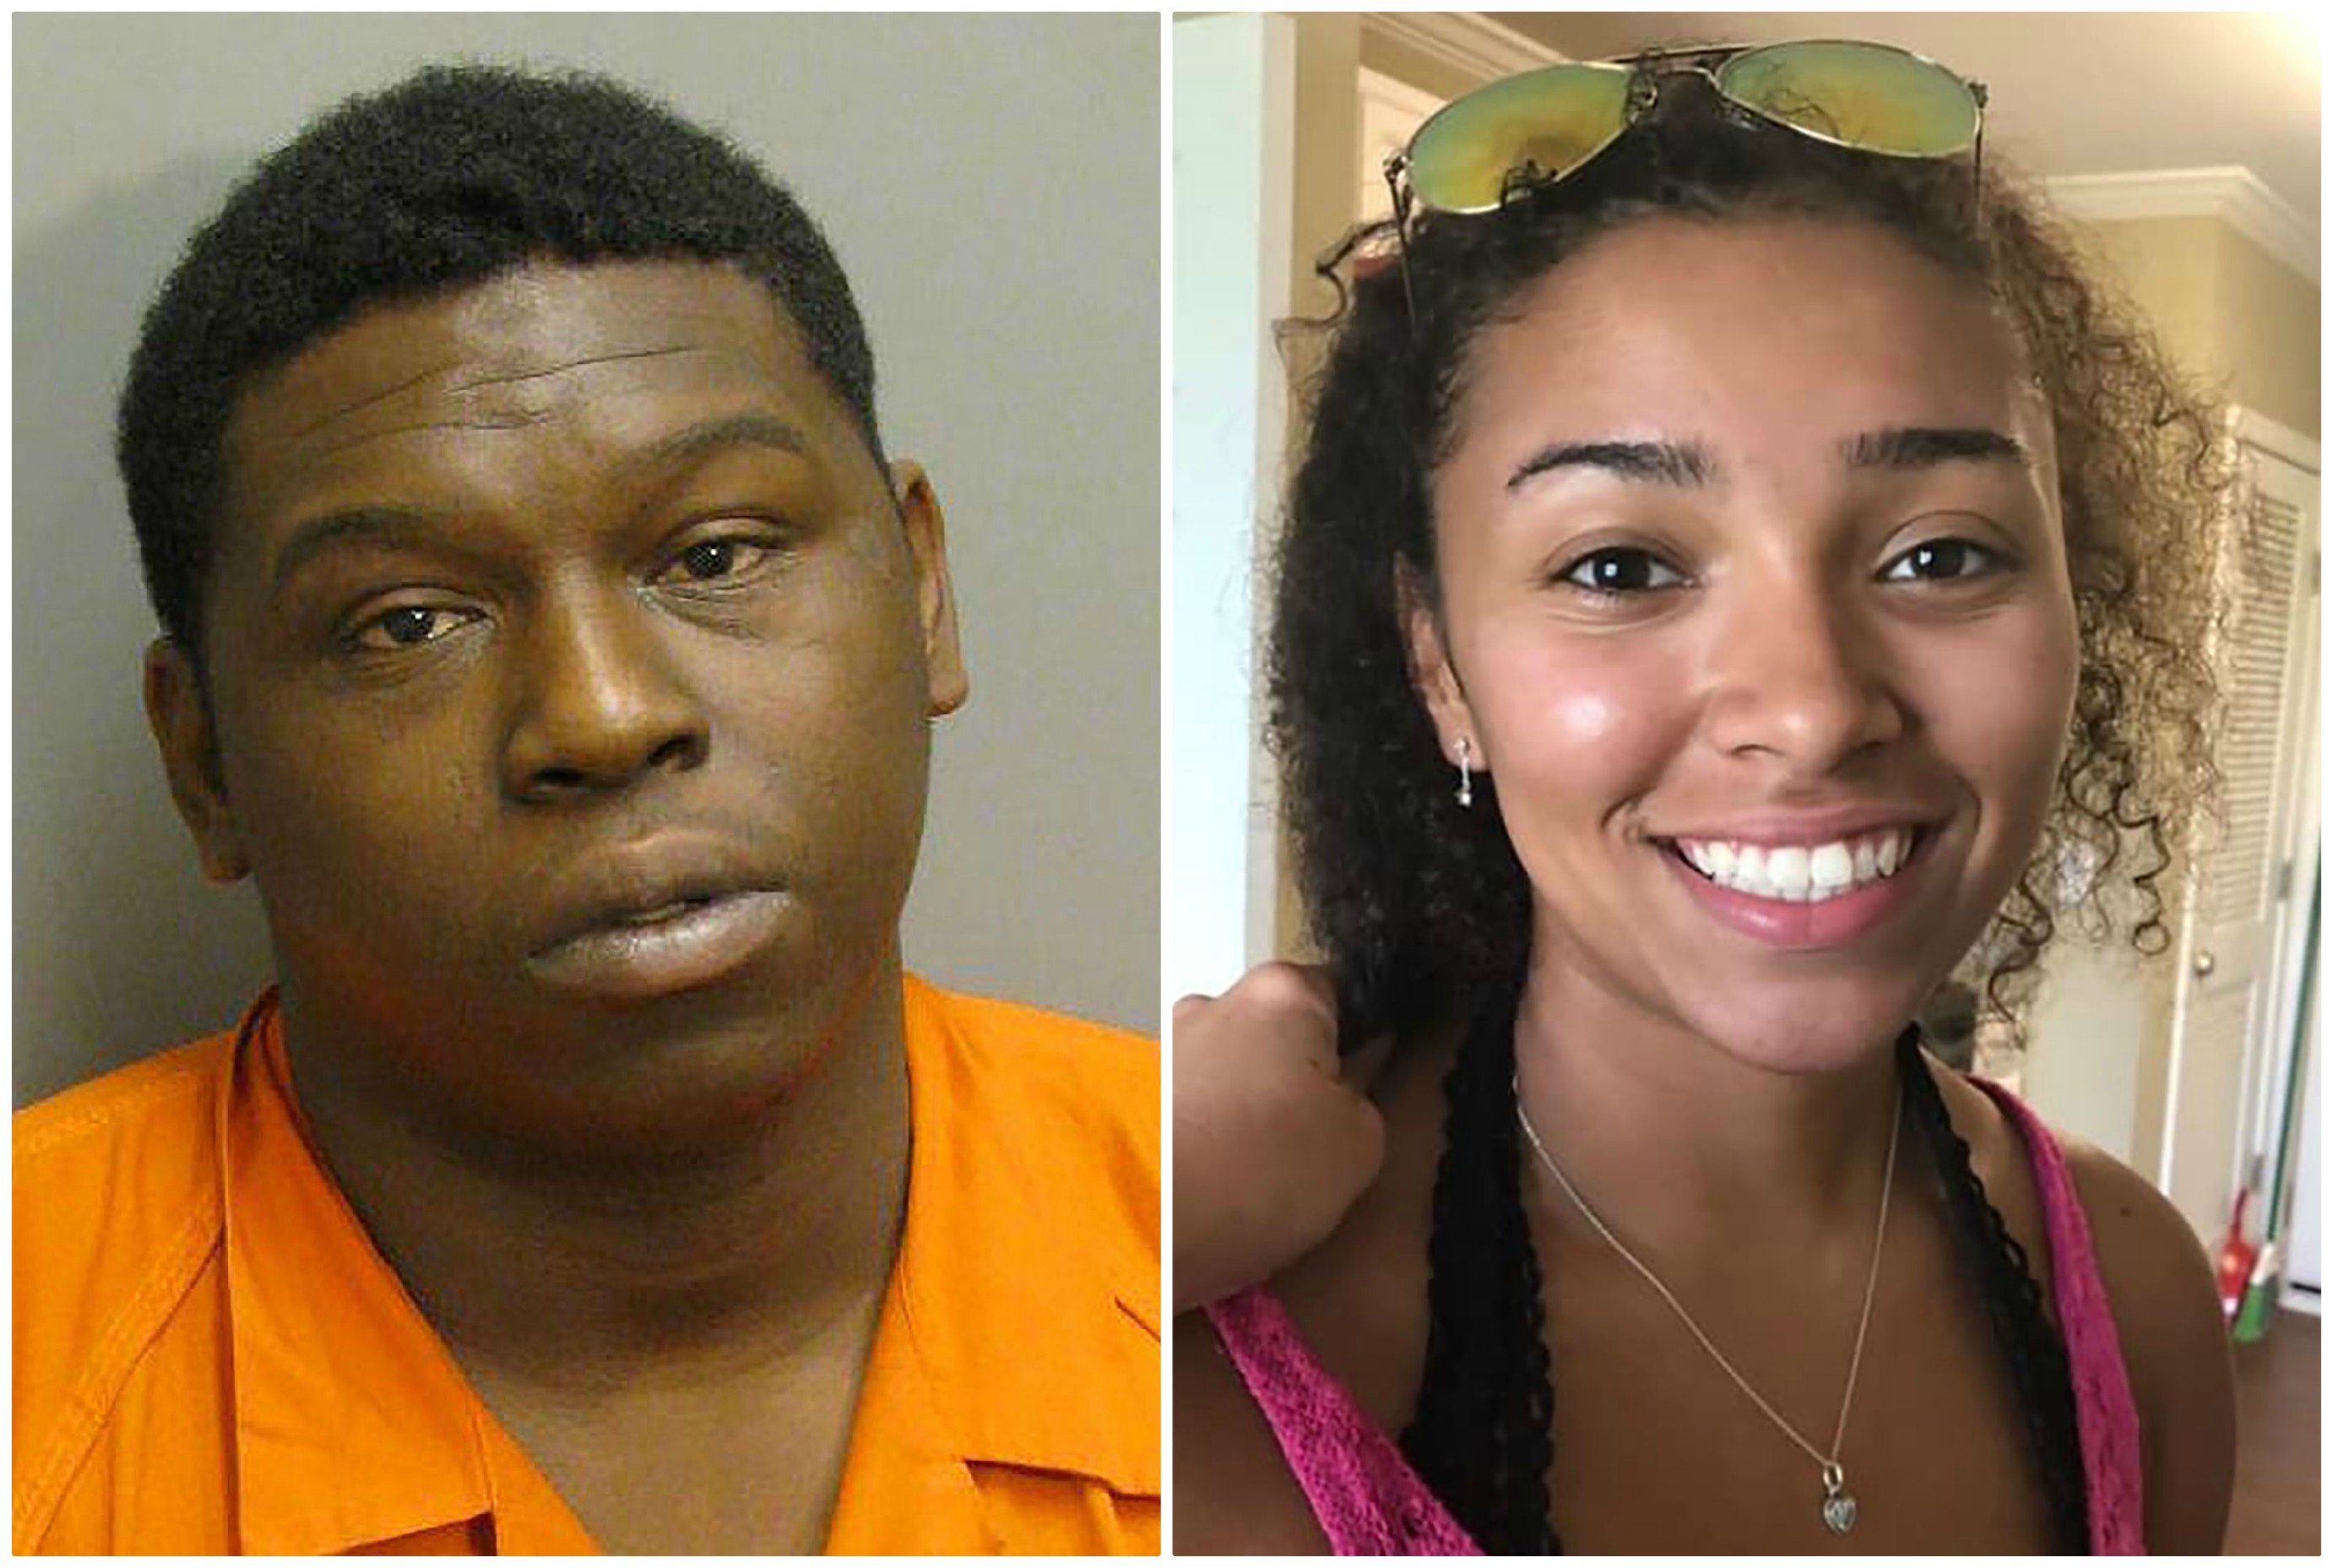 Ibraheem Yazid arrested in kidnapping of Aniah Blanchard